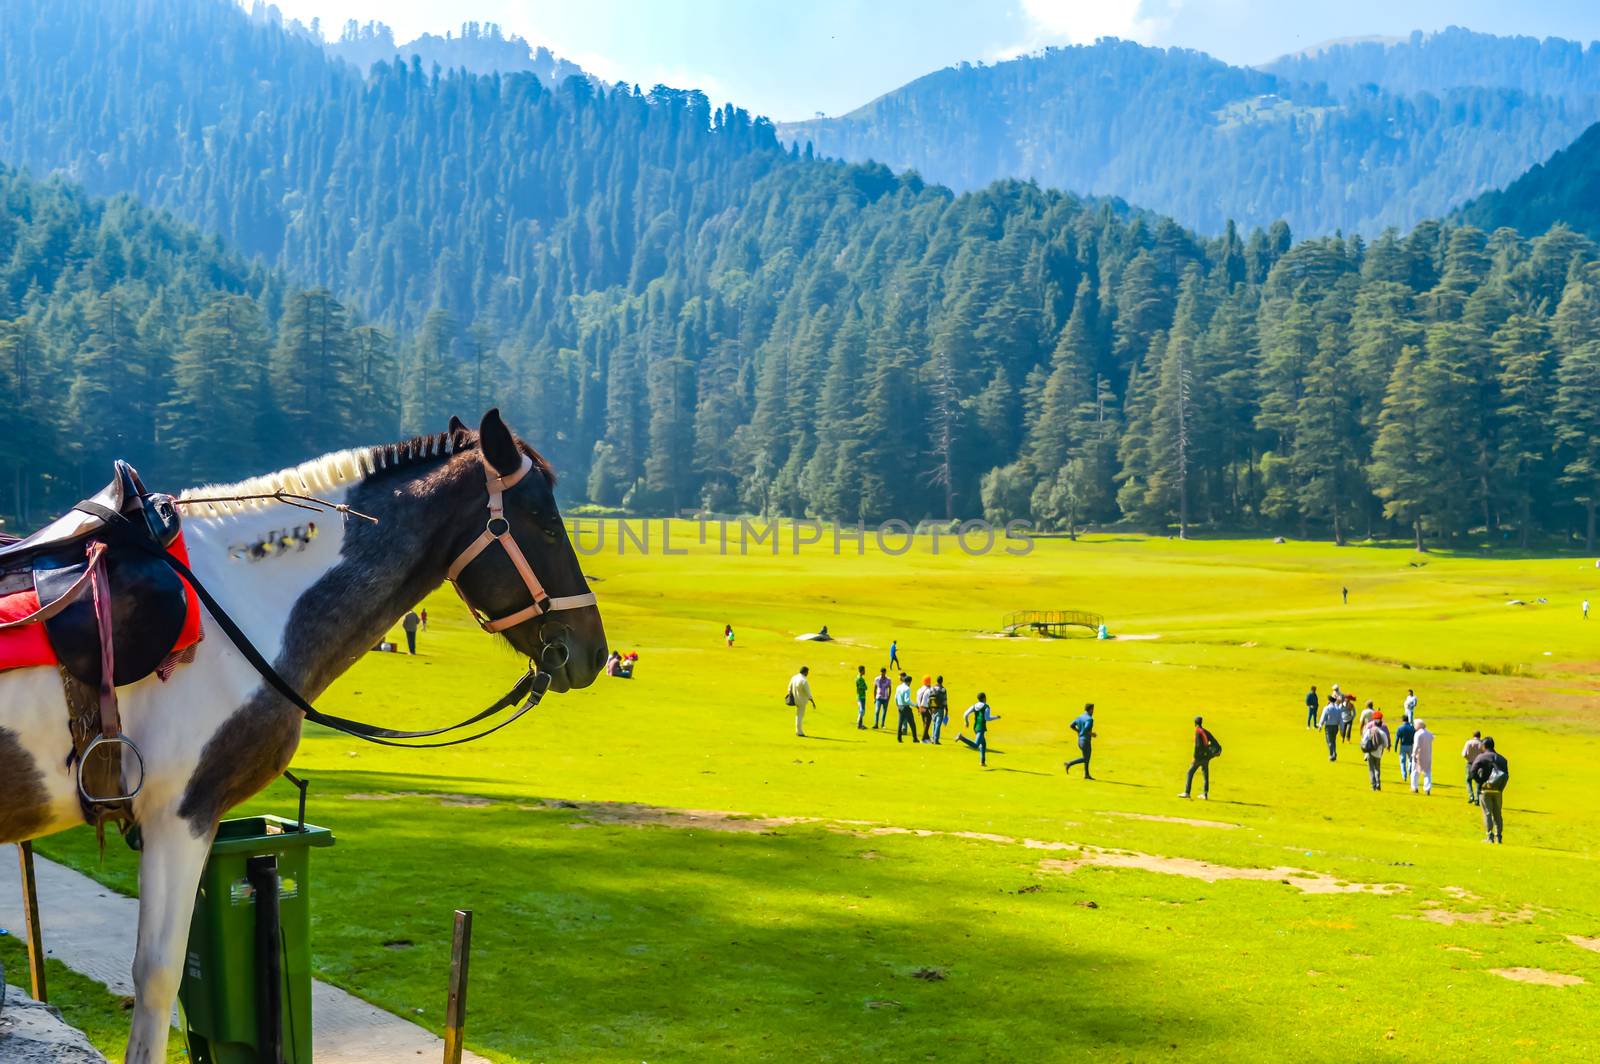 beautiful brown horse standing outdoors Brown horse standing in the green meadow in summer time against trees and mountains Green landscape in the midsummer, in a sunny day sports animal concept